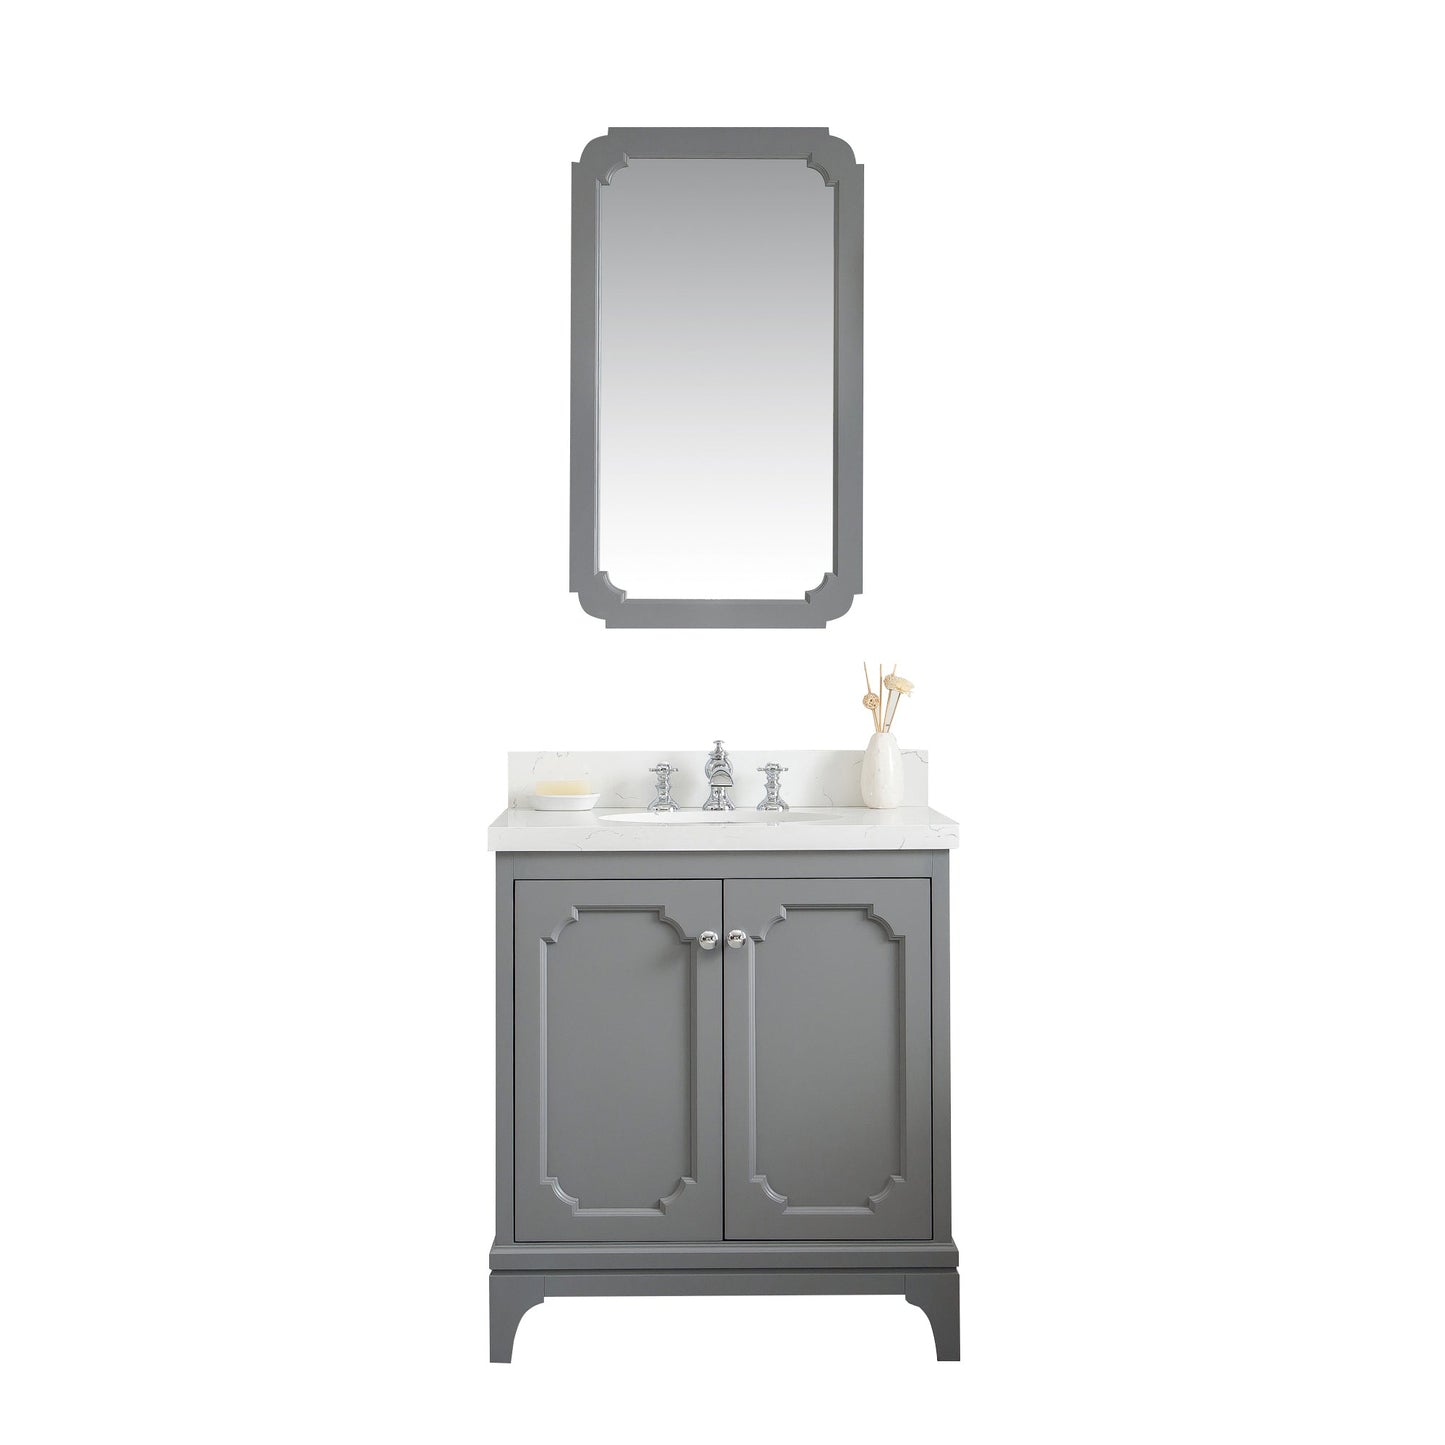 Queen 30-Inch Single Sink Quartz Carrara Vanity In Cashmere Grey  With F2-0013-01-FX Lavatory Faucet(s)